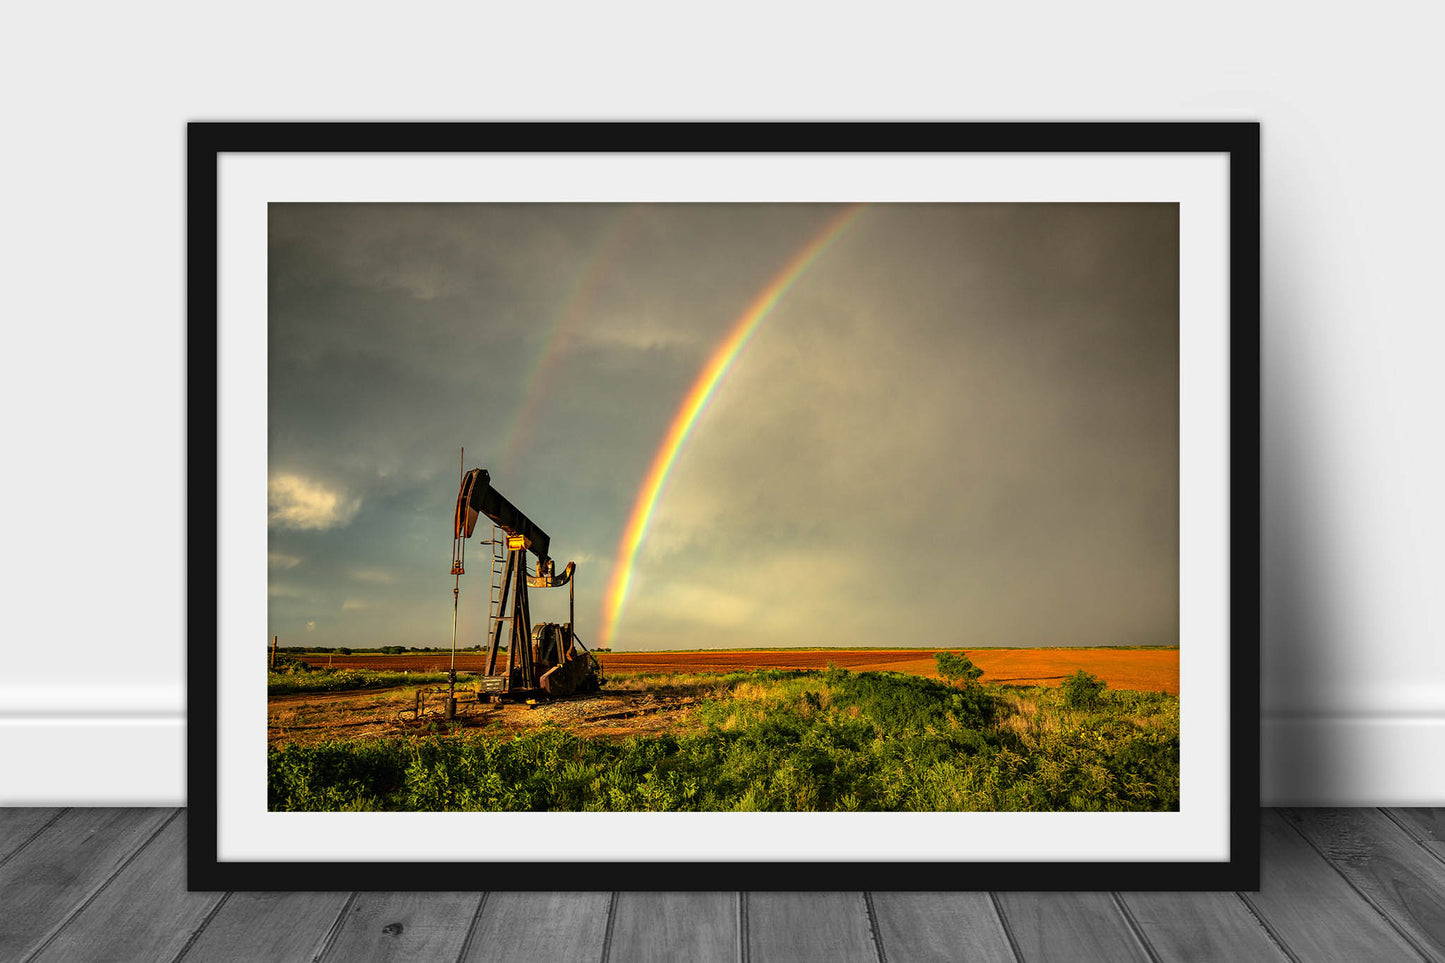 Framed and matted oilfield photography print of a brilliant rainbow ending at a pump jack on a stormy spring day on the plains of Texas by Sean Ramsey of Southern Plains Photography.